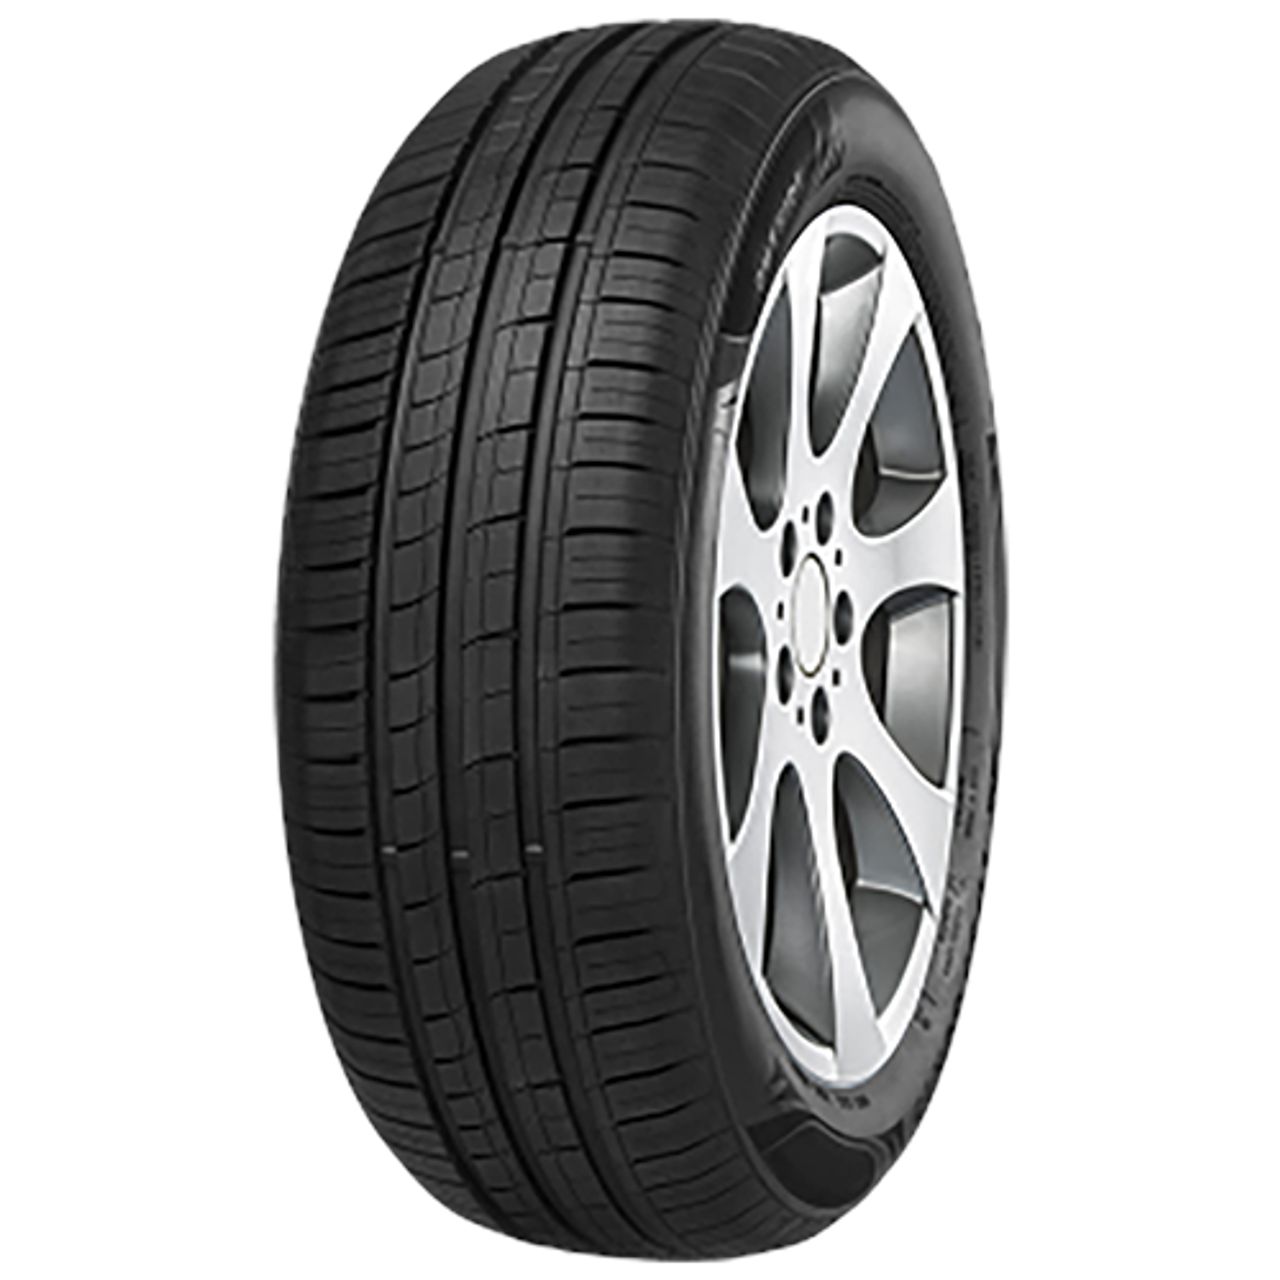 IMPERIAL ECODRIVER 4 155/80R13 79T BSW